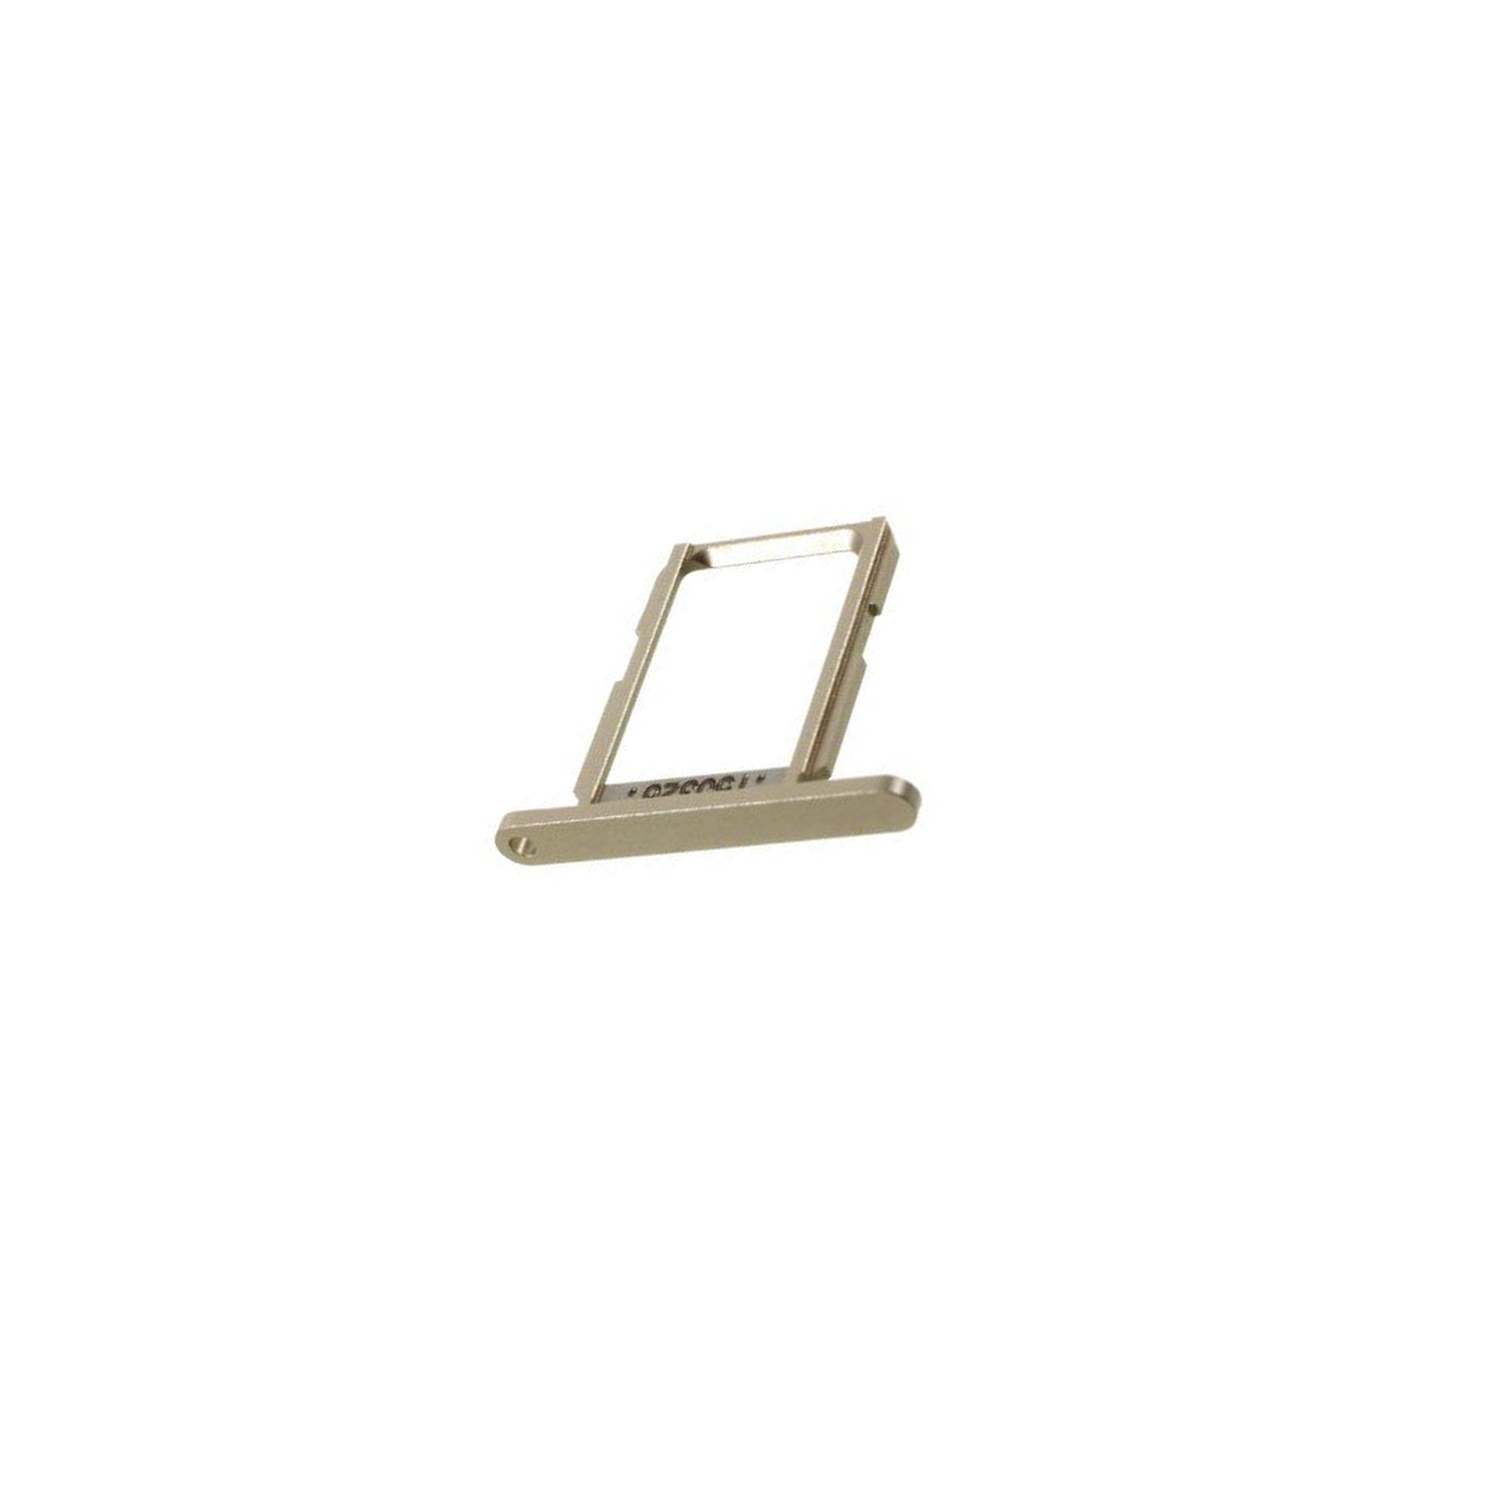 Samsung Galaxy Note 5 Series SIM Card Tray Replacement - Gold